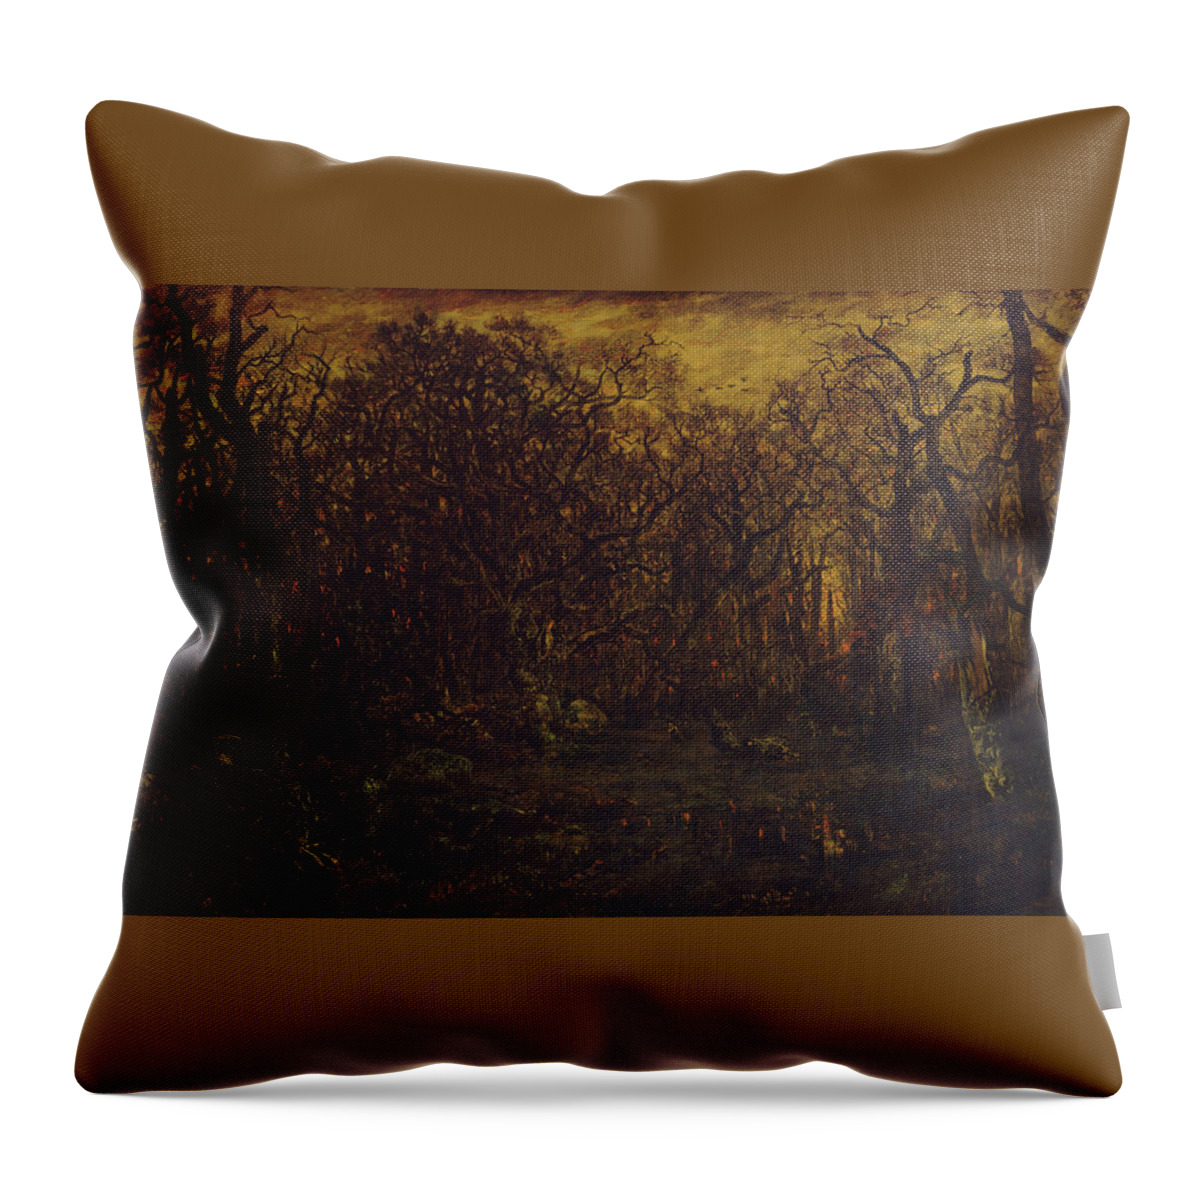 The Forest In Winter At Sunset Throw Pillow featuring the painting The Forest in Winter at Sunset by Theodore Rousseau